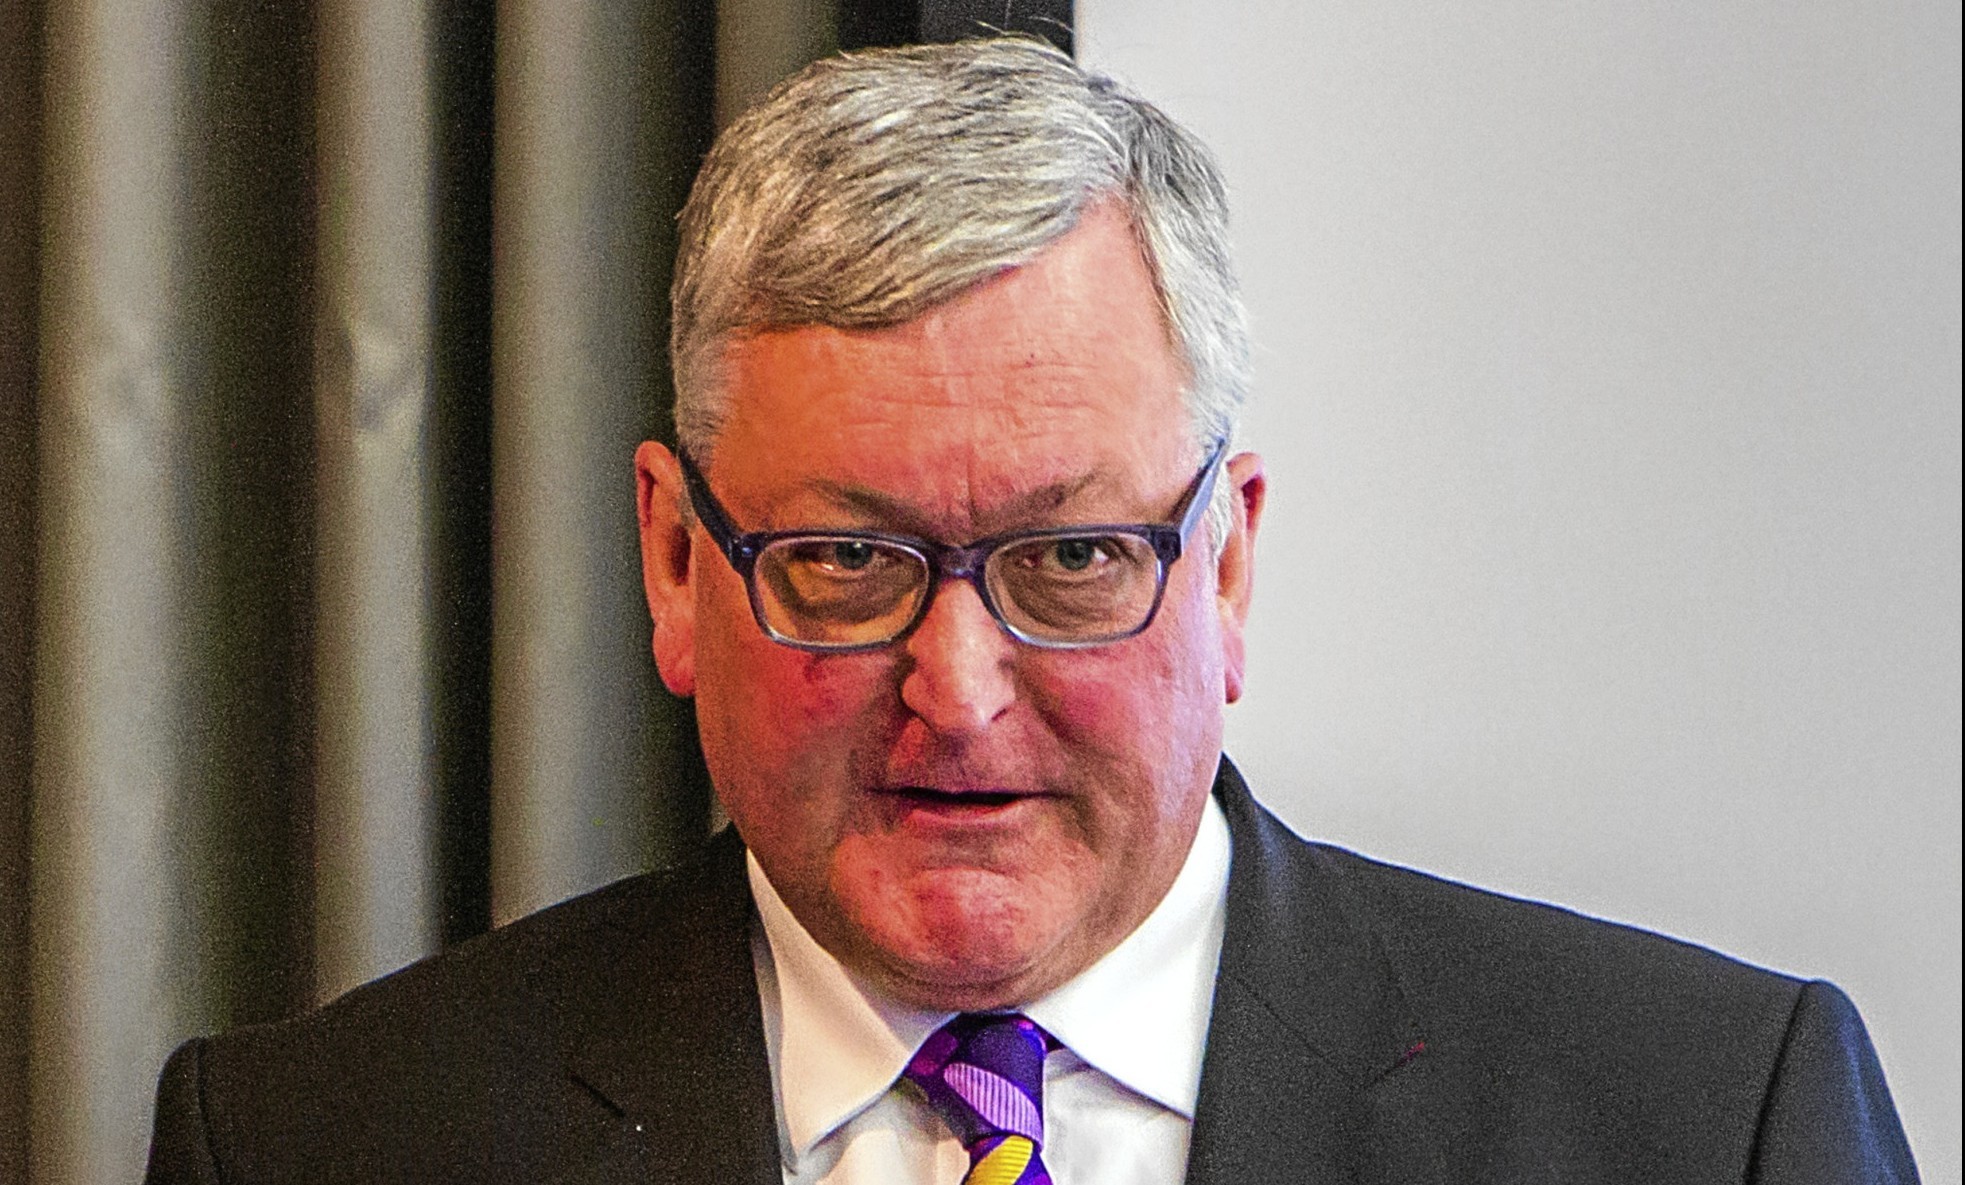 Making the payments has been a "gargantuan administrative challenge", according to Fergus Ewing